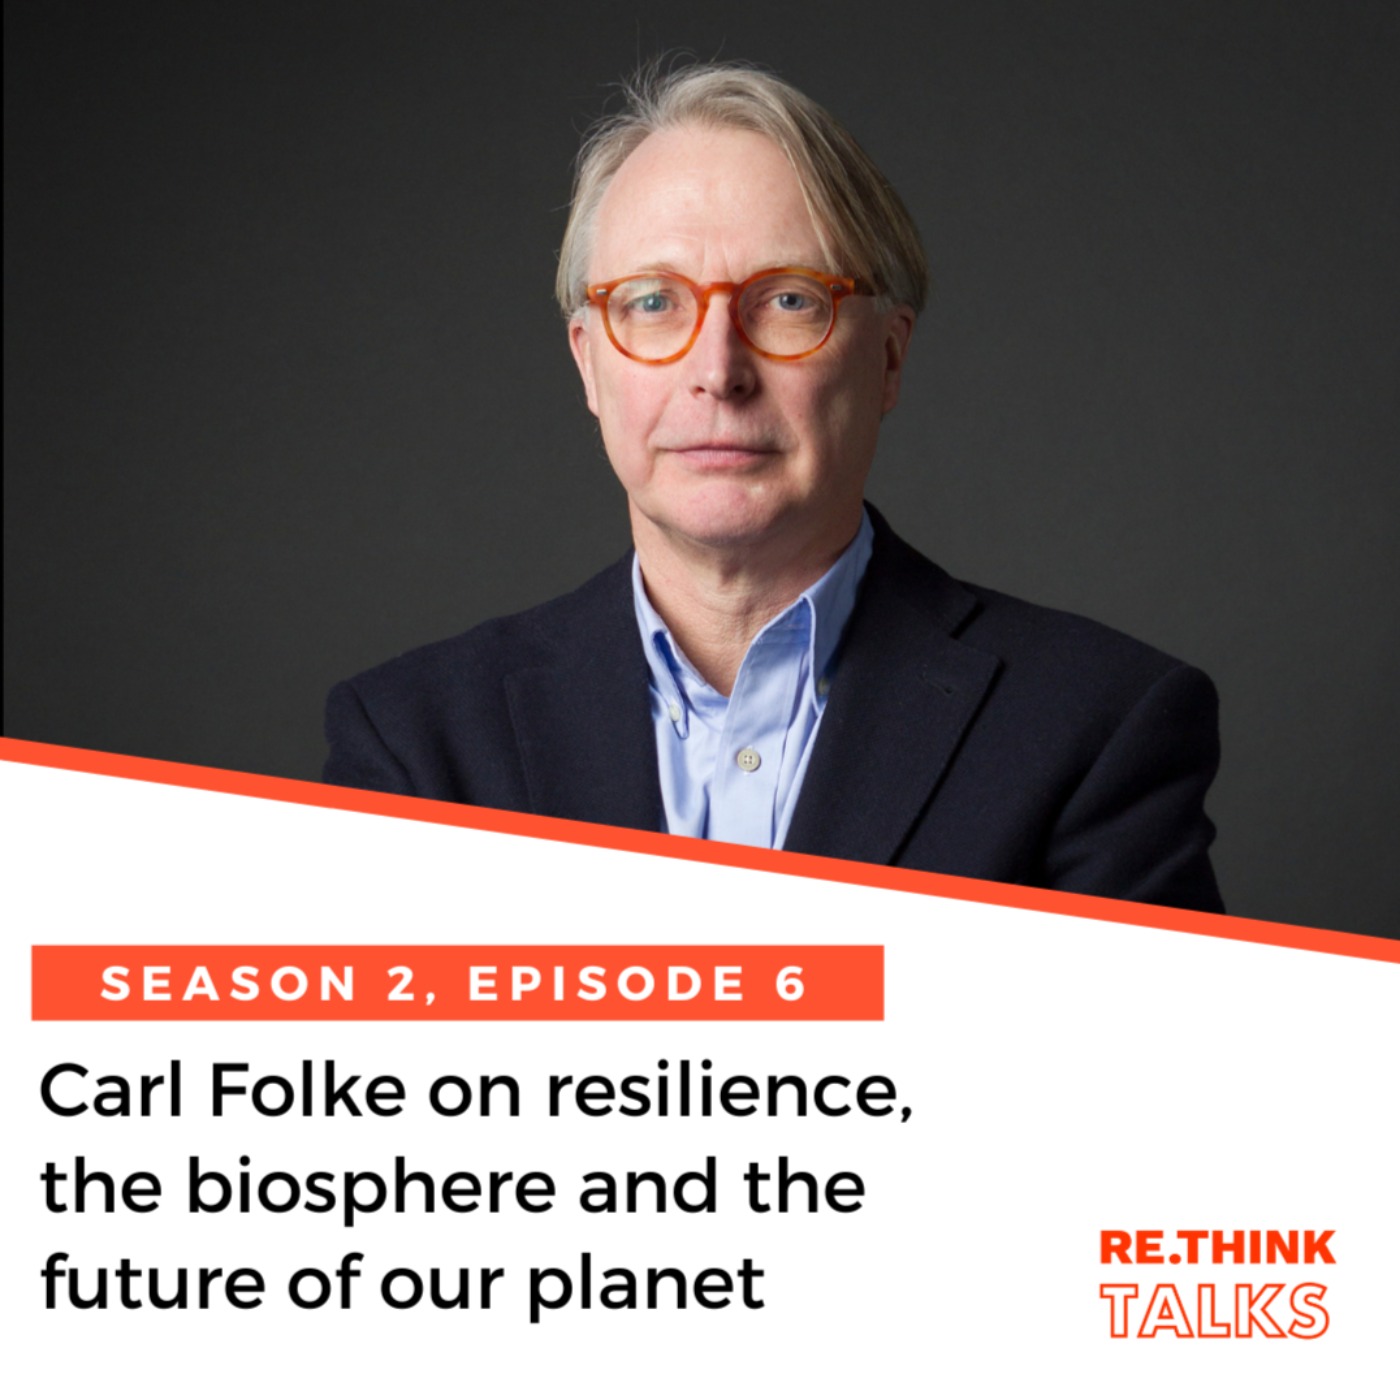 Carl Folke on resilience, the biosphere and the future of our planet